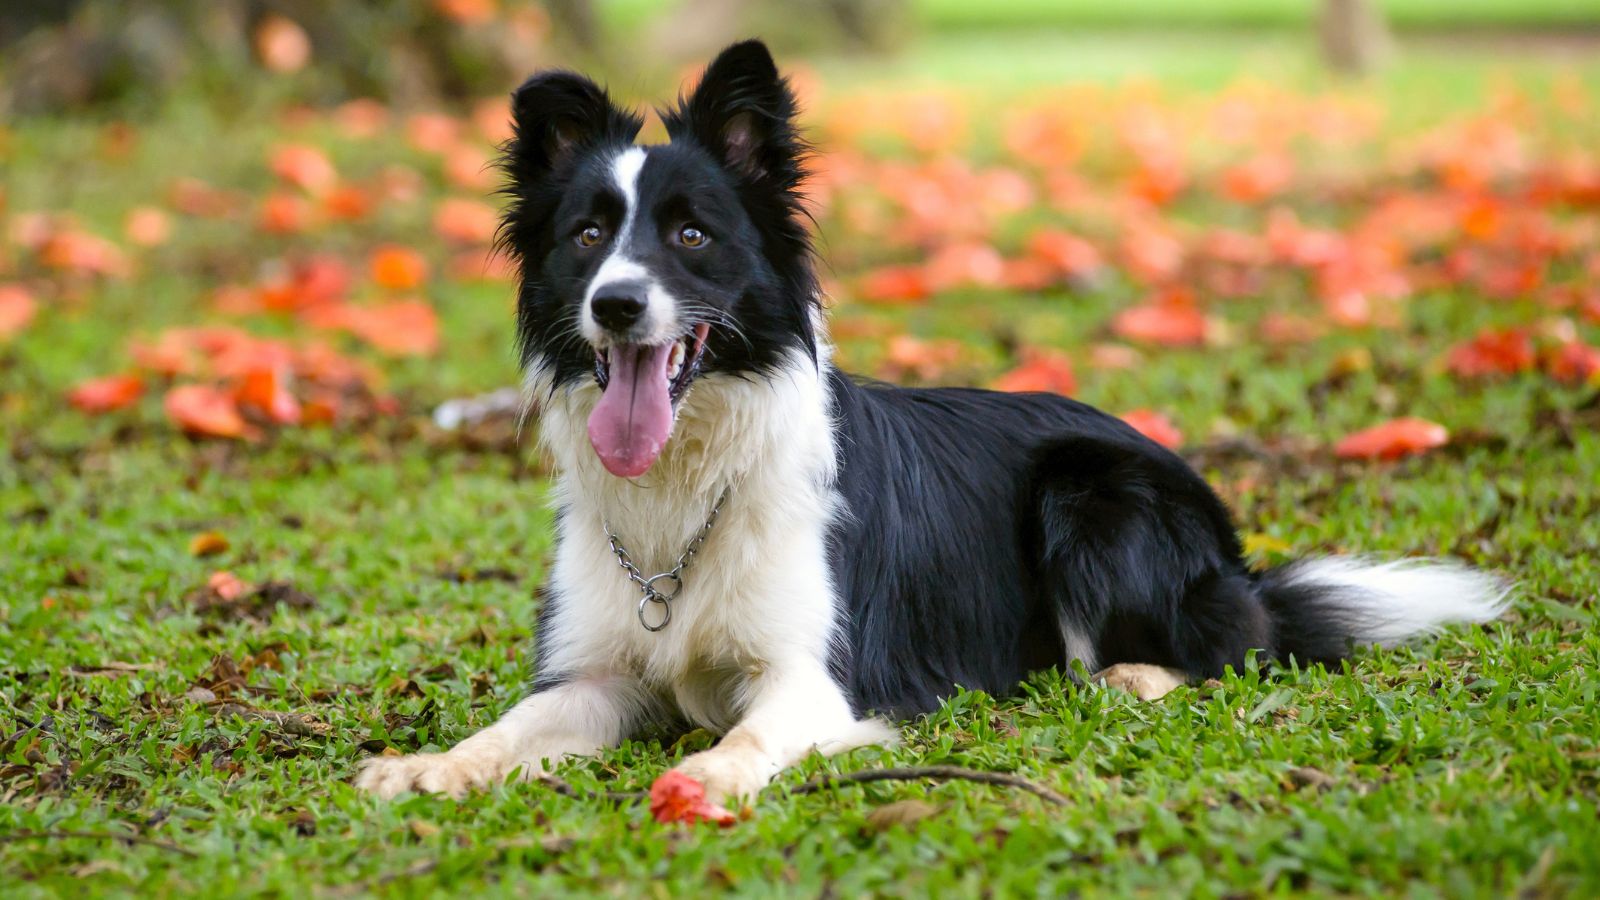 <p><span>The third sheepdog on the list, the Border Collie, is also highly intelligent and loyal. These black-and-white working dogs are always alert to their owners’ commands and keen to please them, making them responsive and easy to train. Their dedication to their owners is evident, and they make devoted, energetic pets. </span></p>